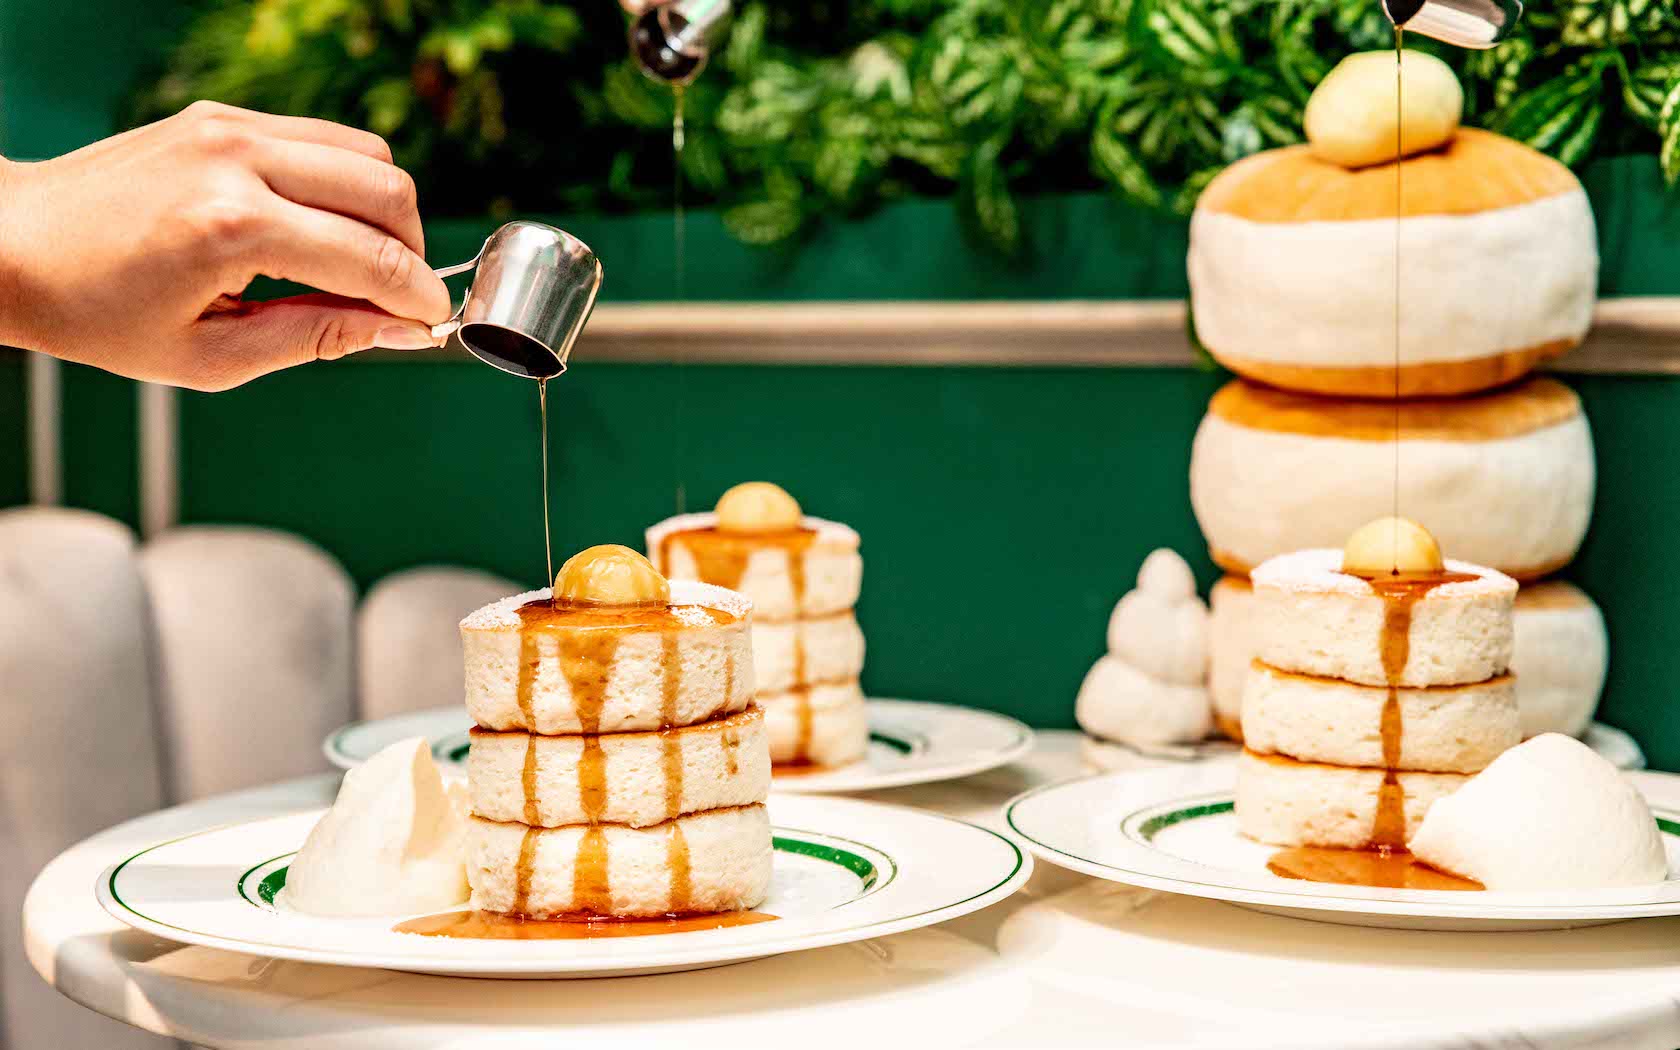 10 Of The Best Desserts In Sydney For Your Next Sweet Tooth Indulgence